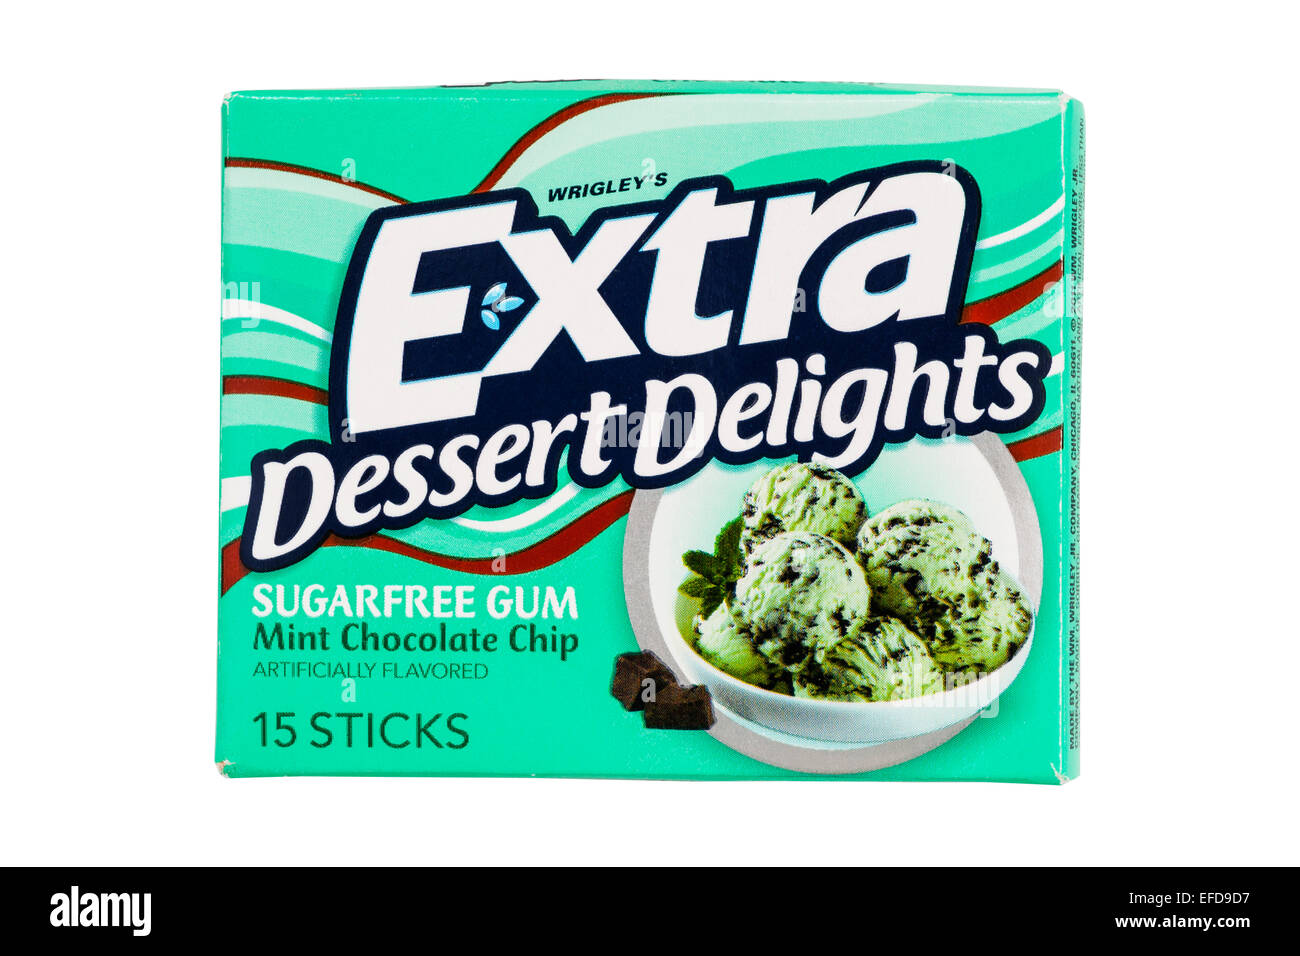 A packet of Wrigley's Extra Dessert Delights Mint Chocolate chip chewing gum on a white background Stock Photo